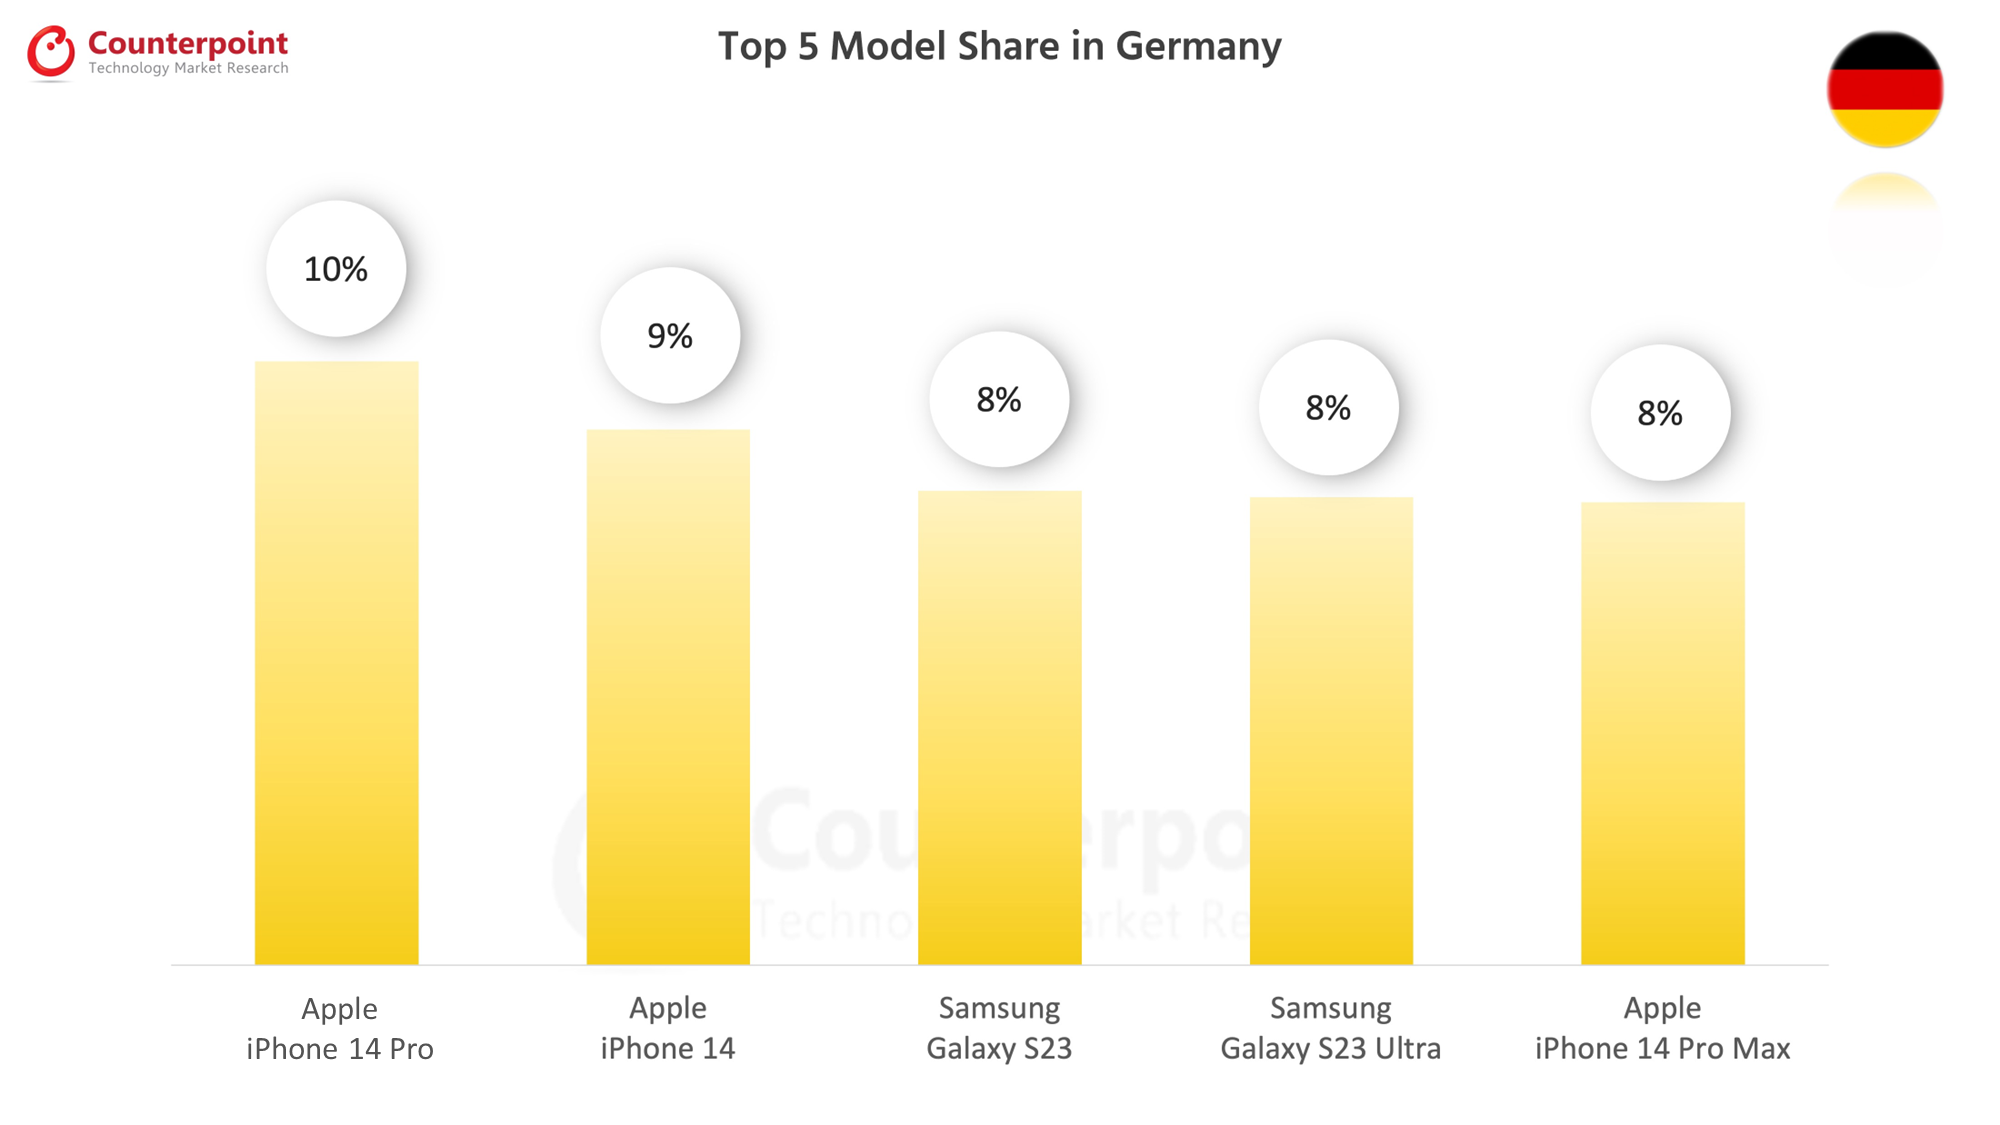 Top 5 Smartphone Model Share in Germany